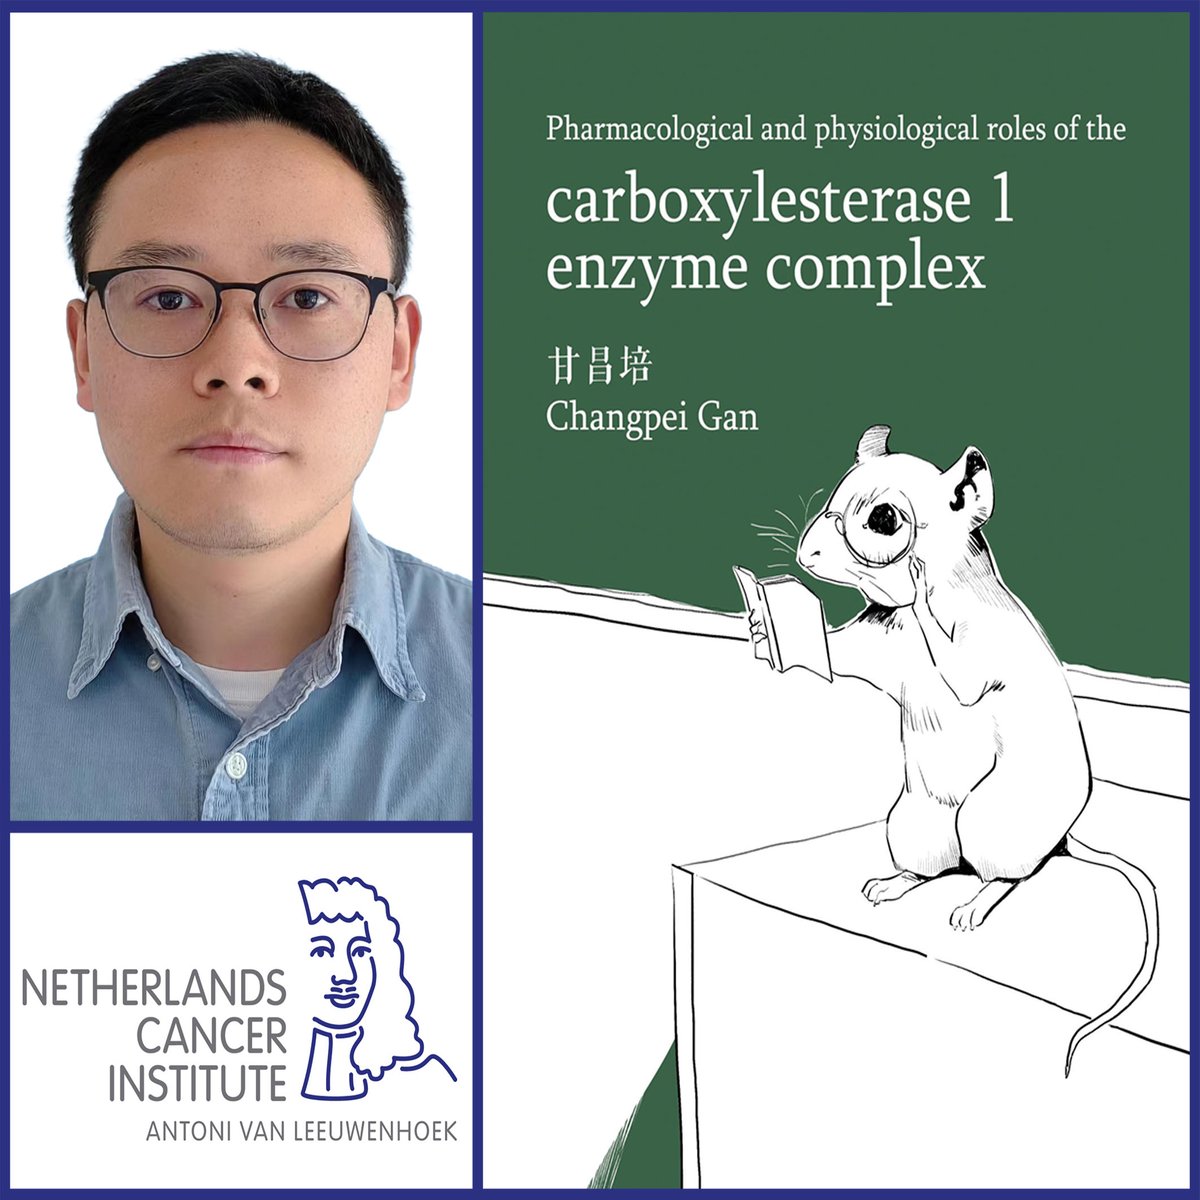 Changpei Gan was the first in his family to travel to Europe for research purposes @hetAVL @uniutrecht. Now he is a PhD candidate in the Netherlands, investigating the functioning of an enzyme that breaks down medications ➡️ bit.ly/3SNhn9x